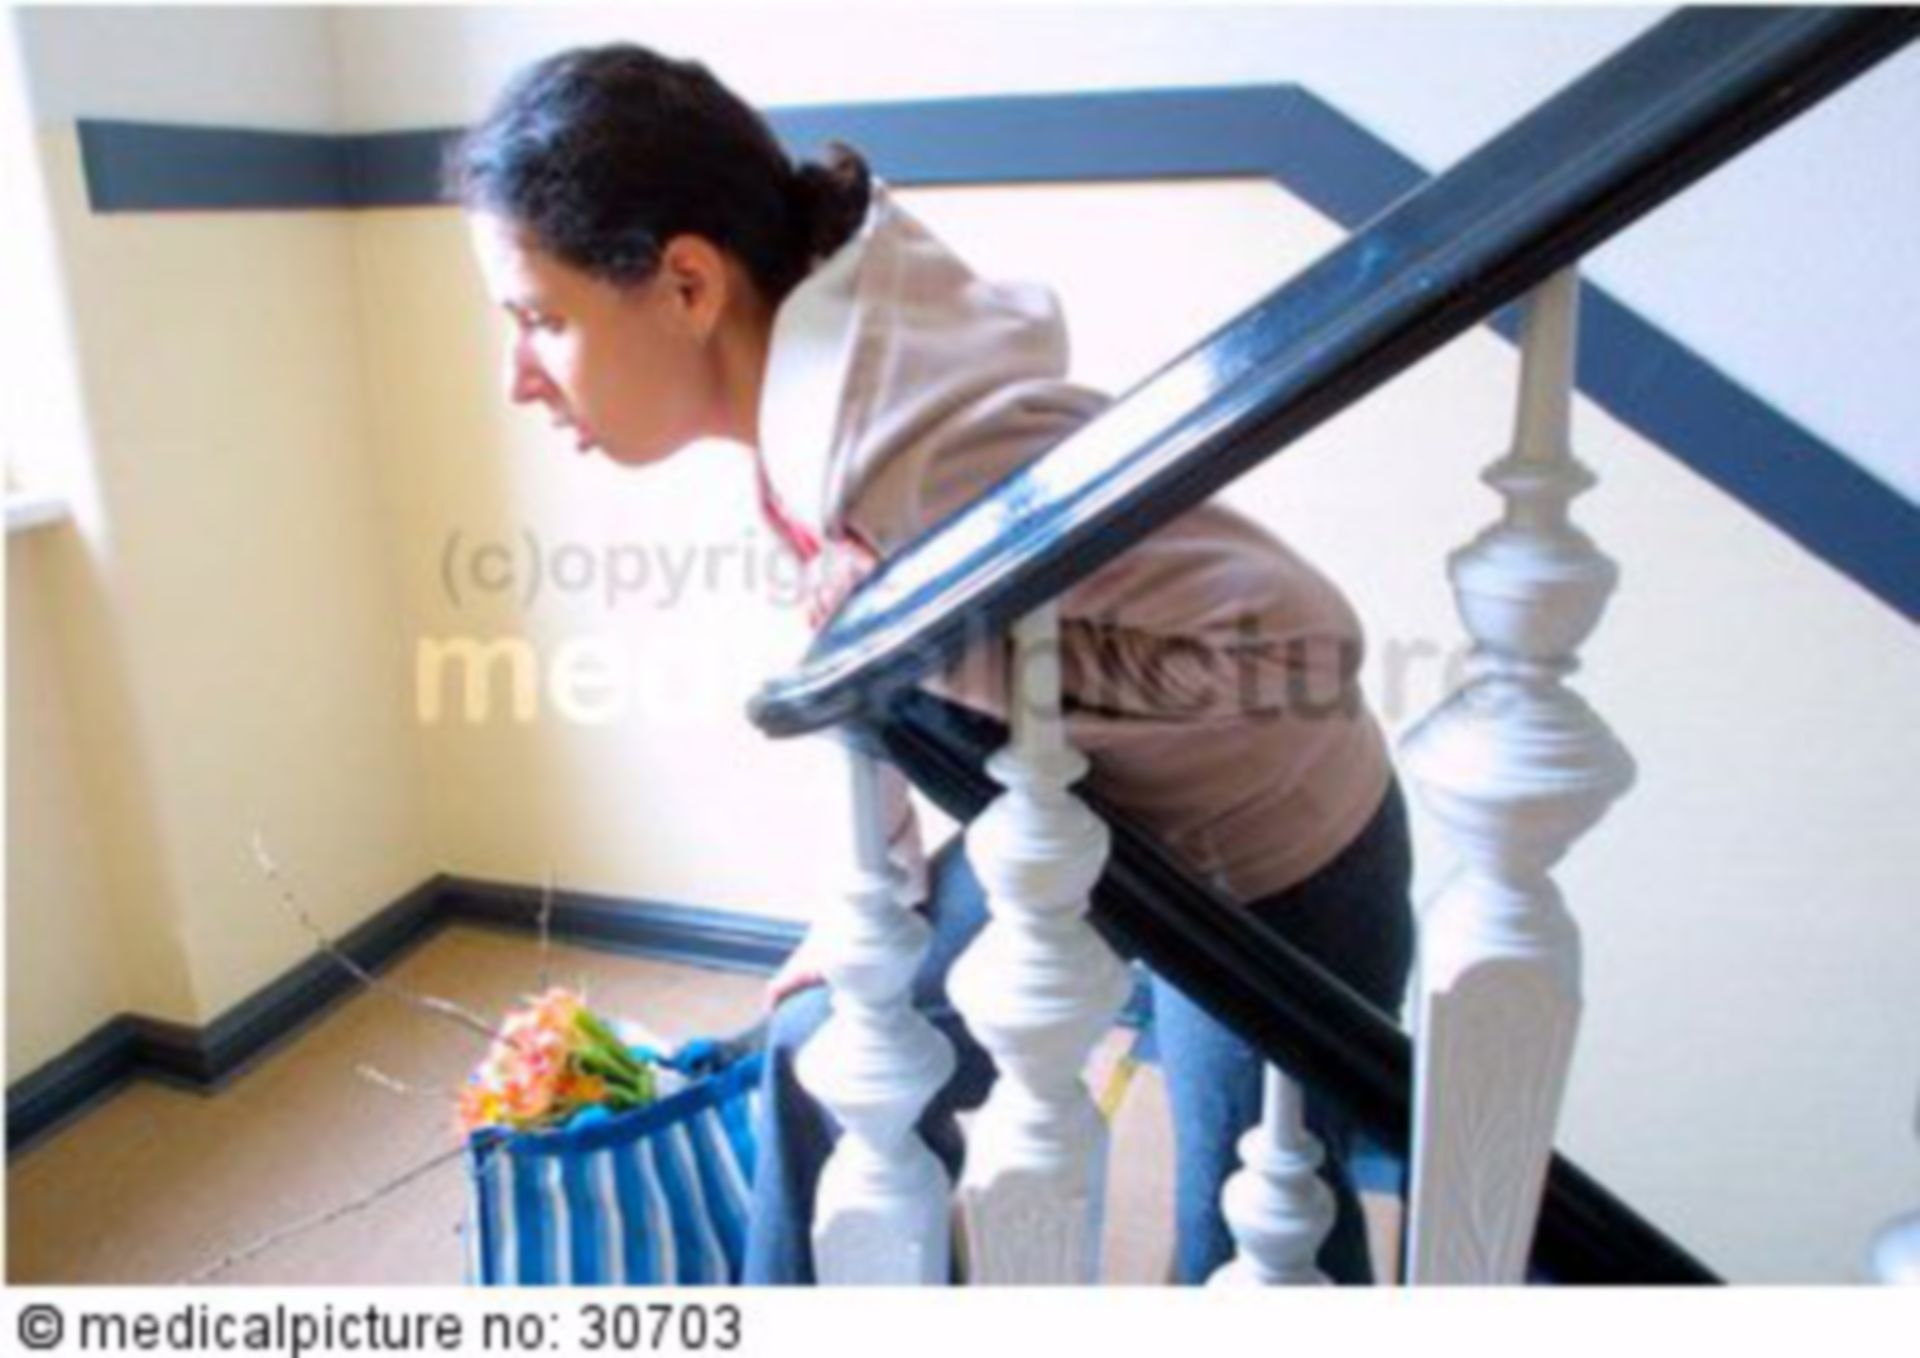 Dyspnea and circulatory problems while climbing stairs